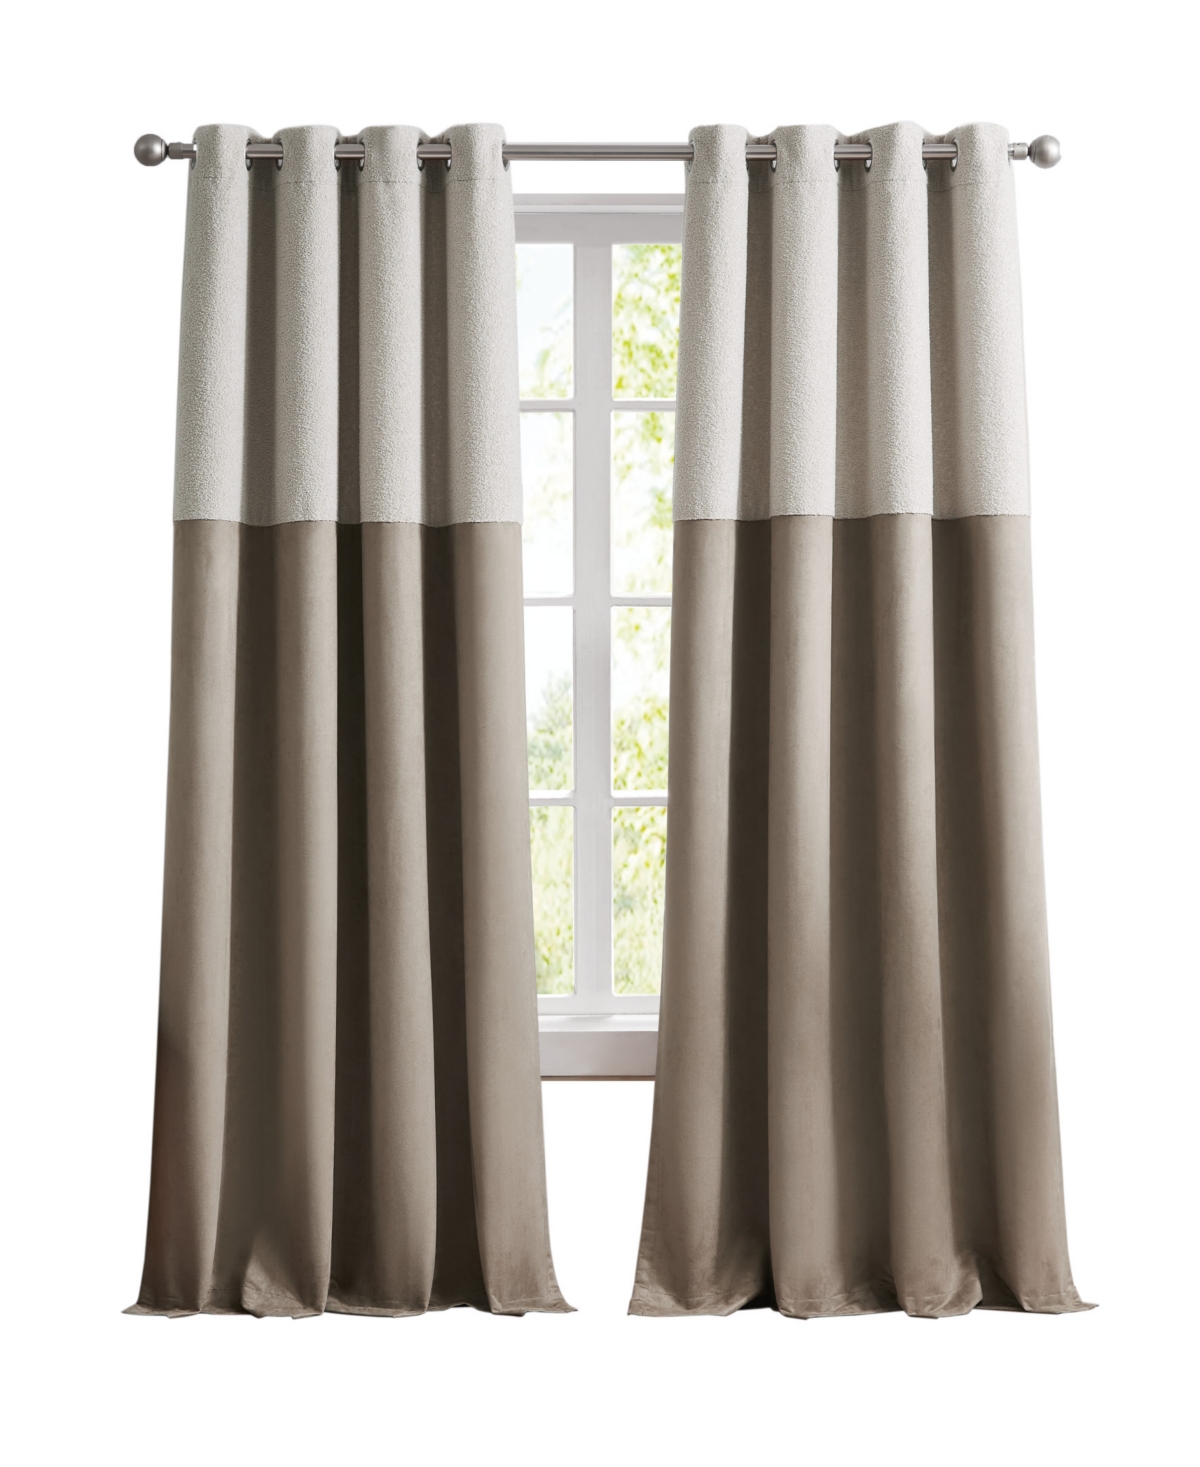 G.h. Bass & Co. Canyon Sherpa 84" Grommet Room Darkening Lined Set, 2 Panels In Oatmeal